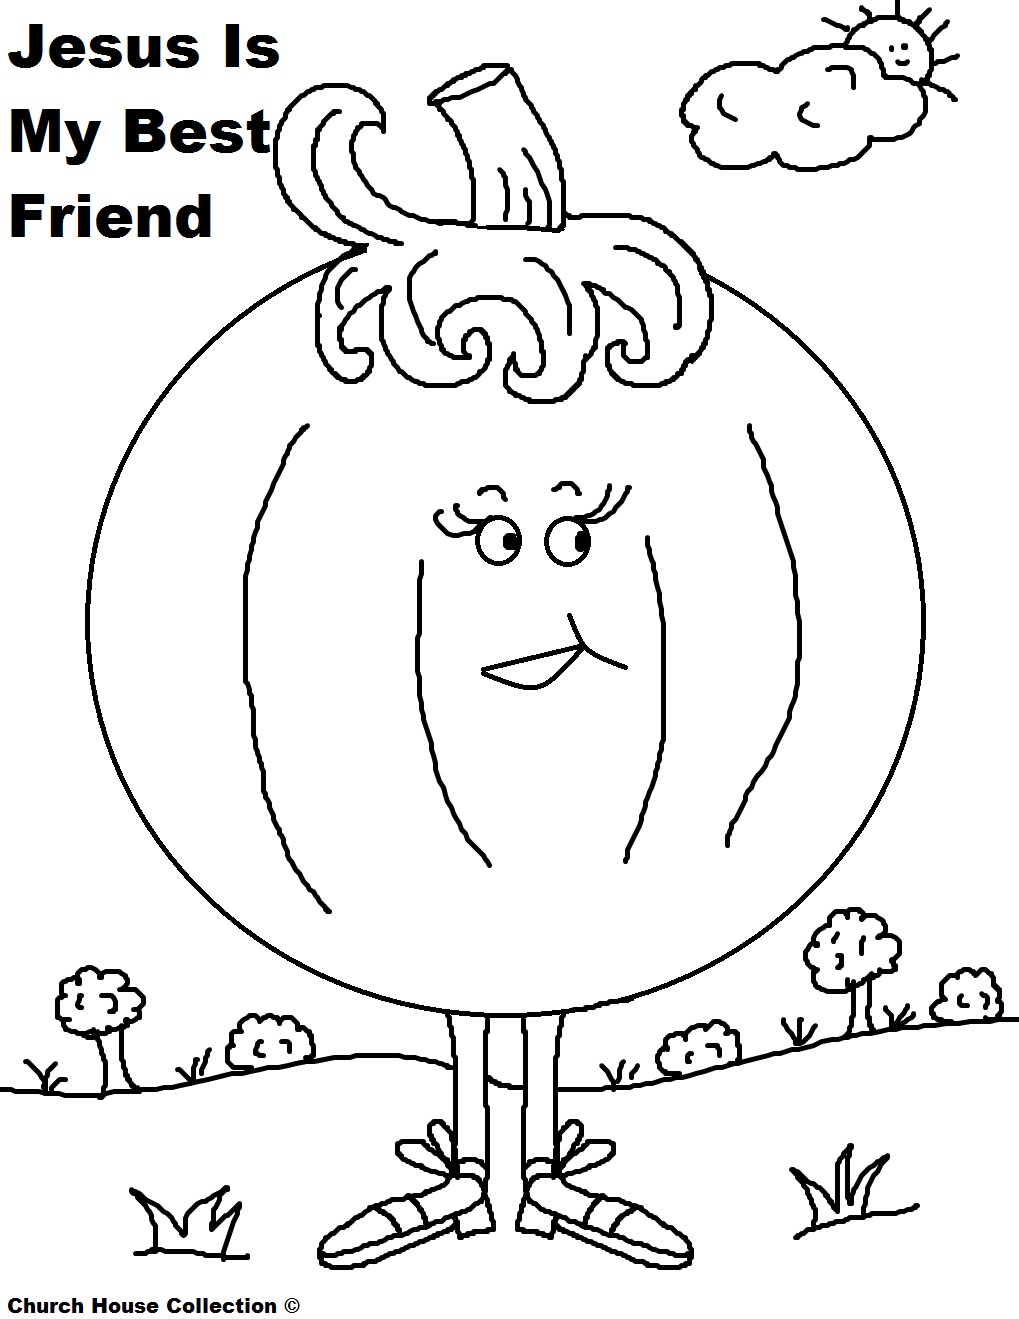 Church house collection blog free printable pumpkin coloring pages for sunday school childrens church or at home